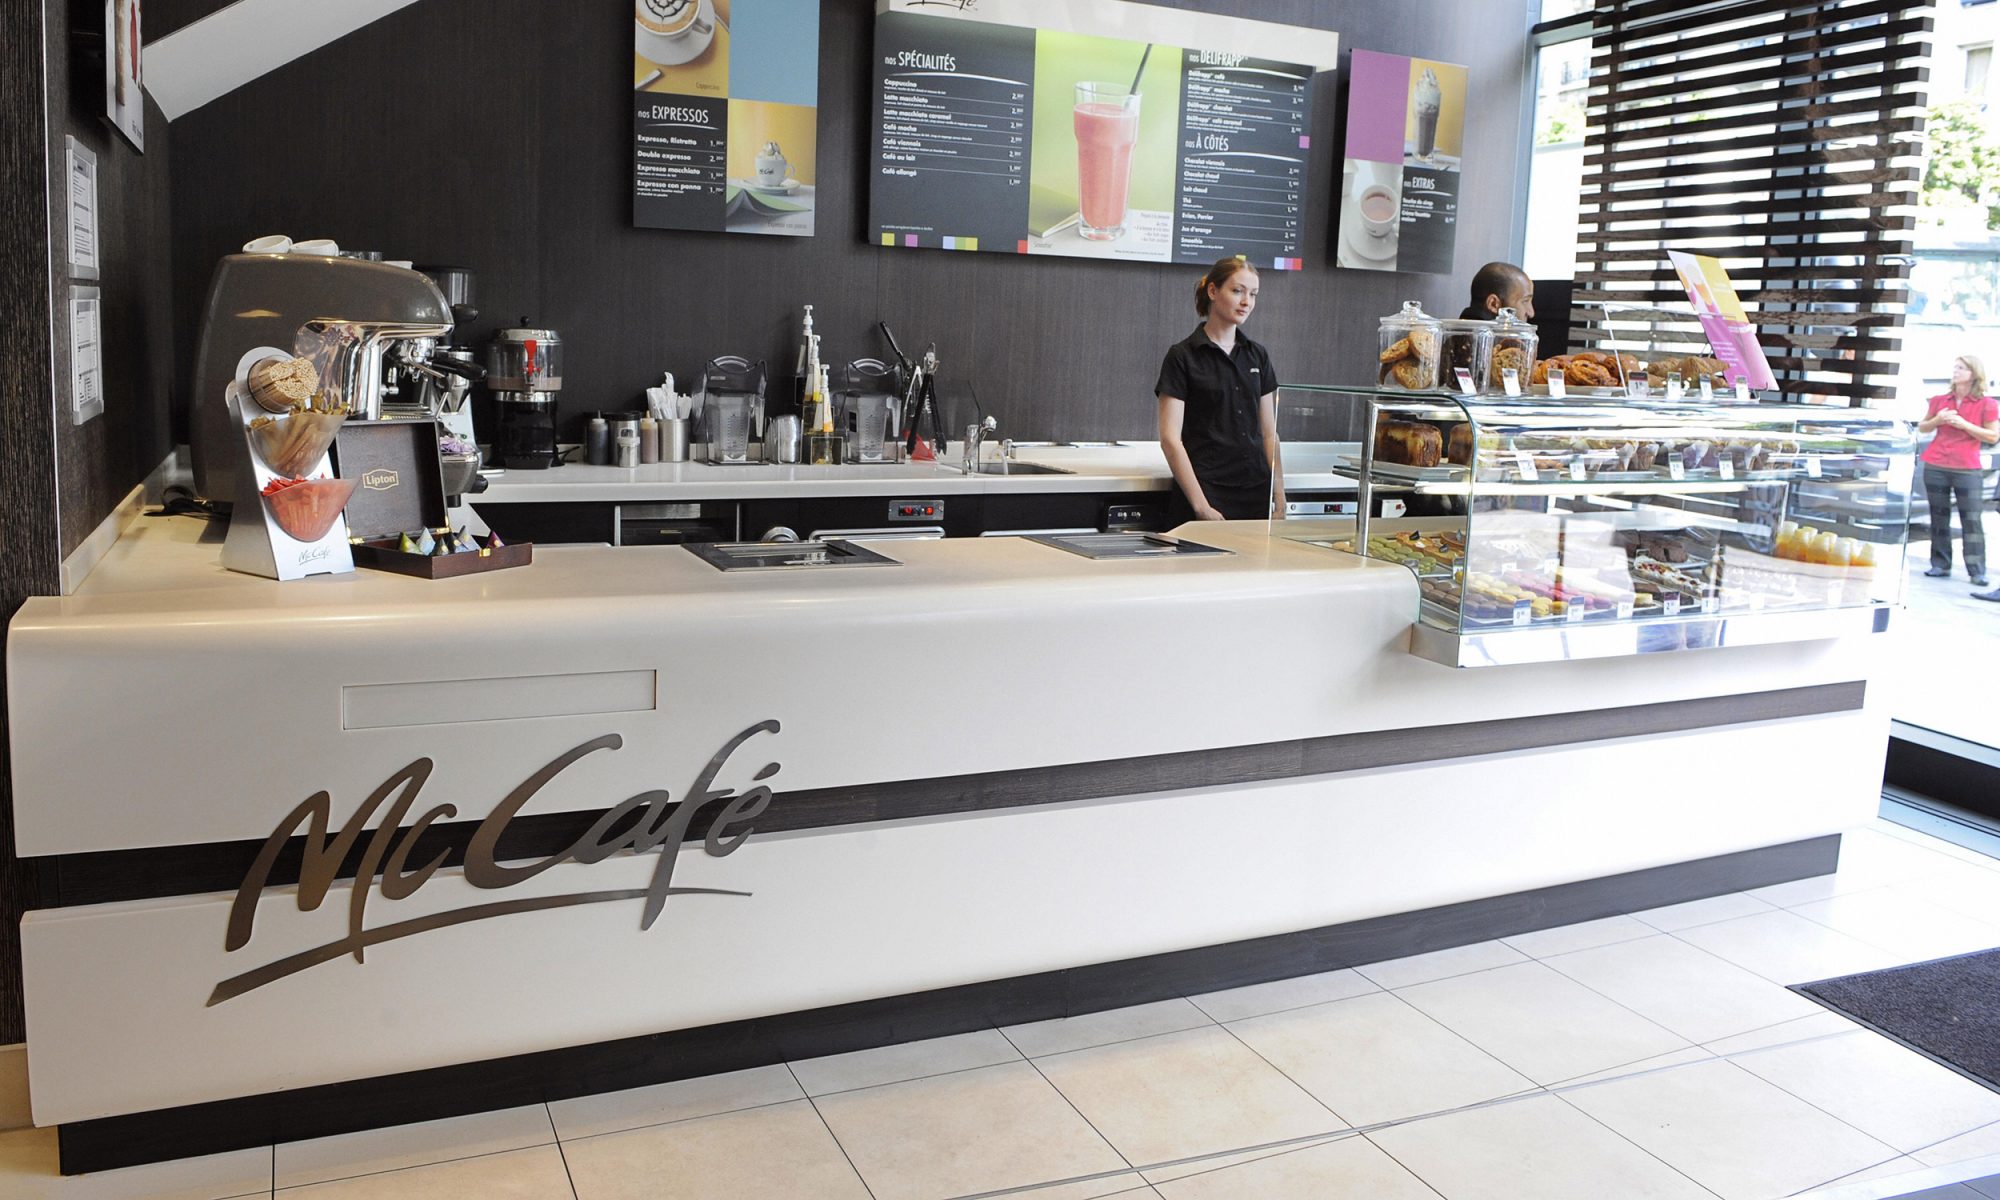 EC: France&apos;s Newest McDonald&apos;s Restaurant Only Sells Coffee and Pastries